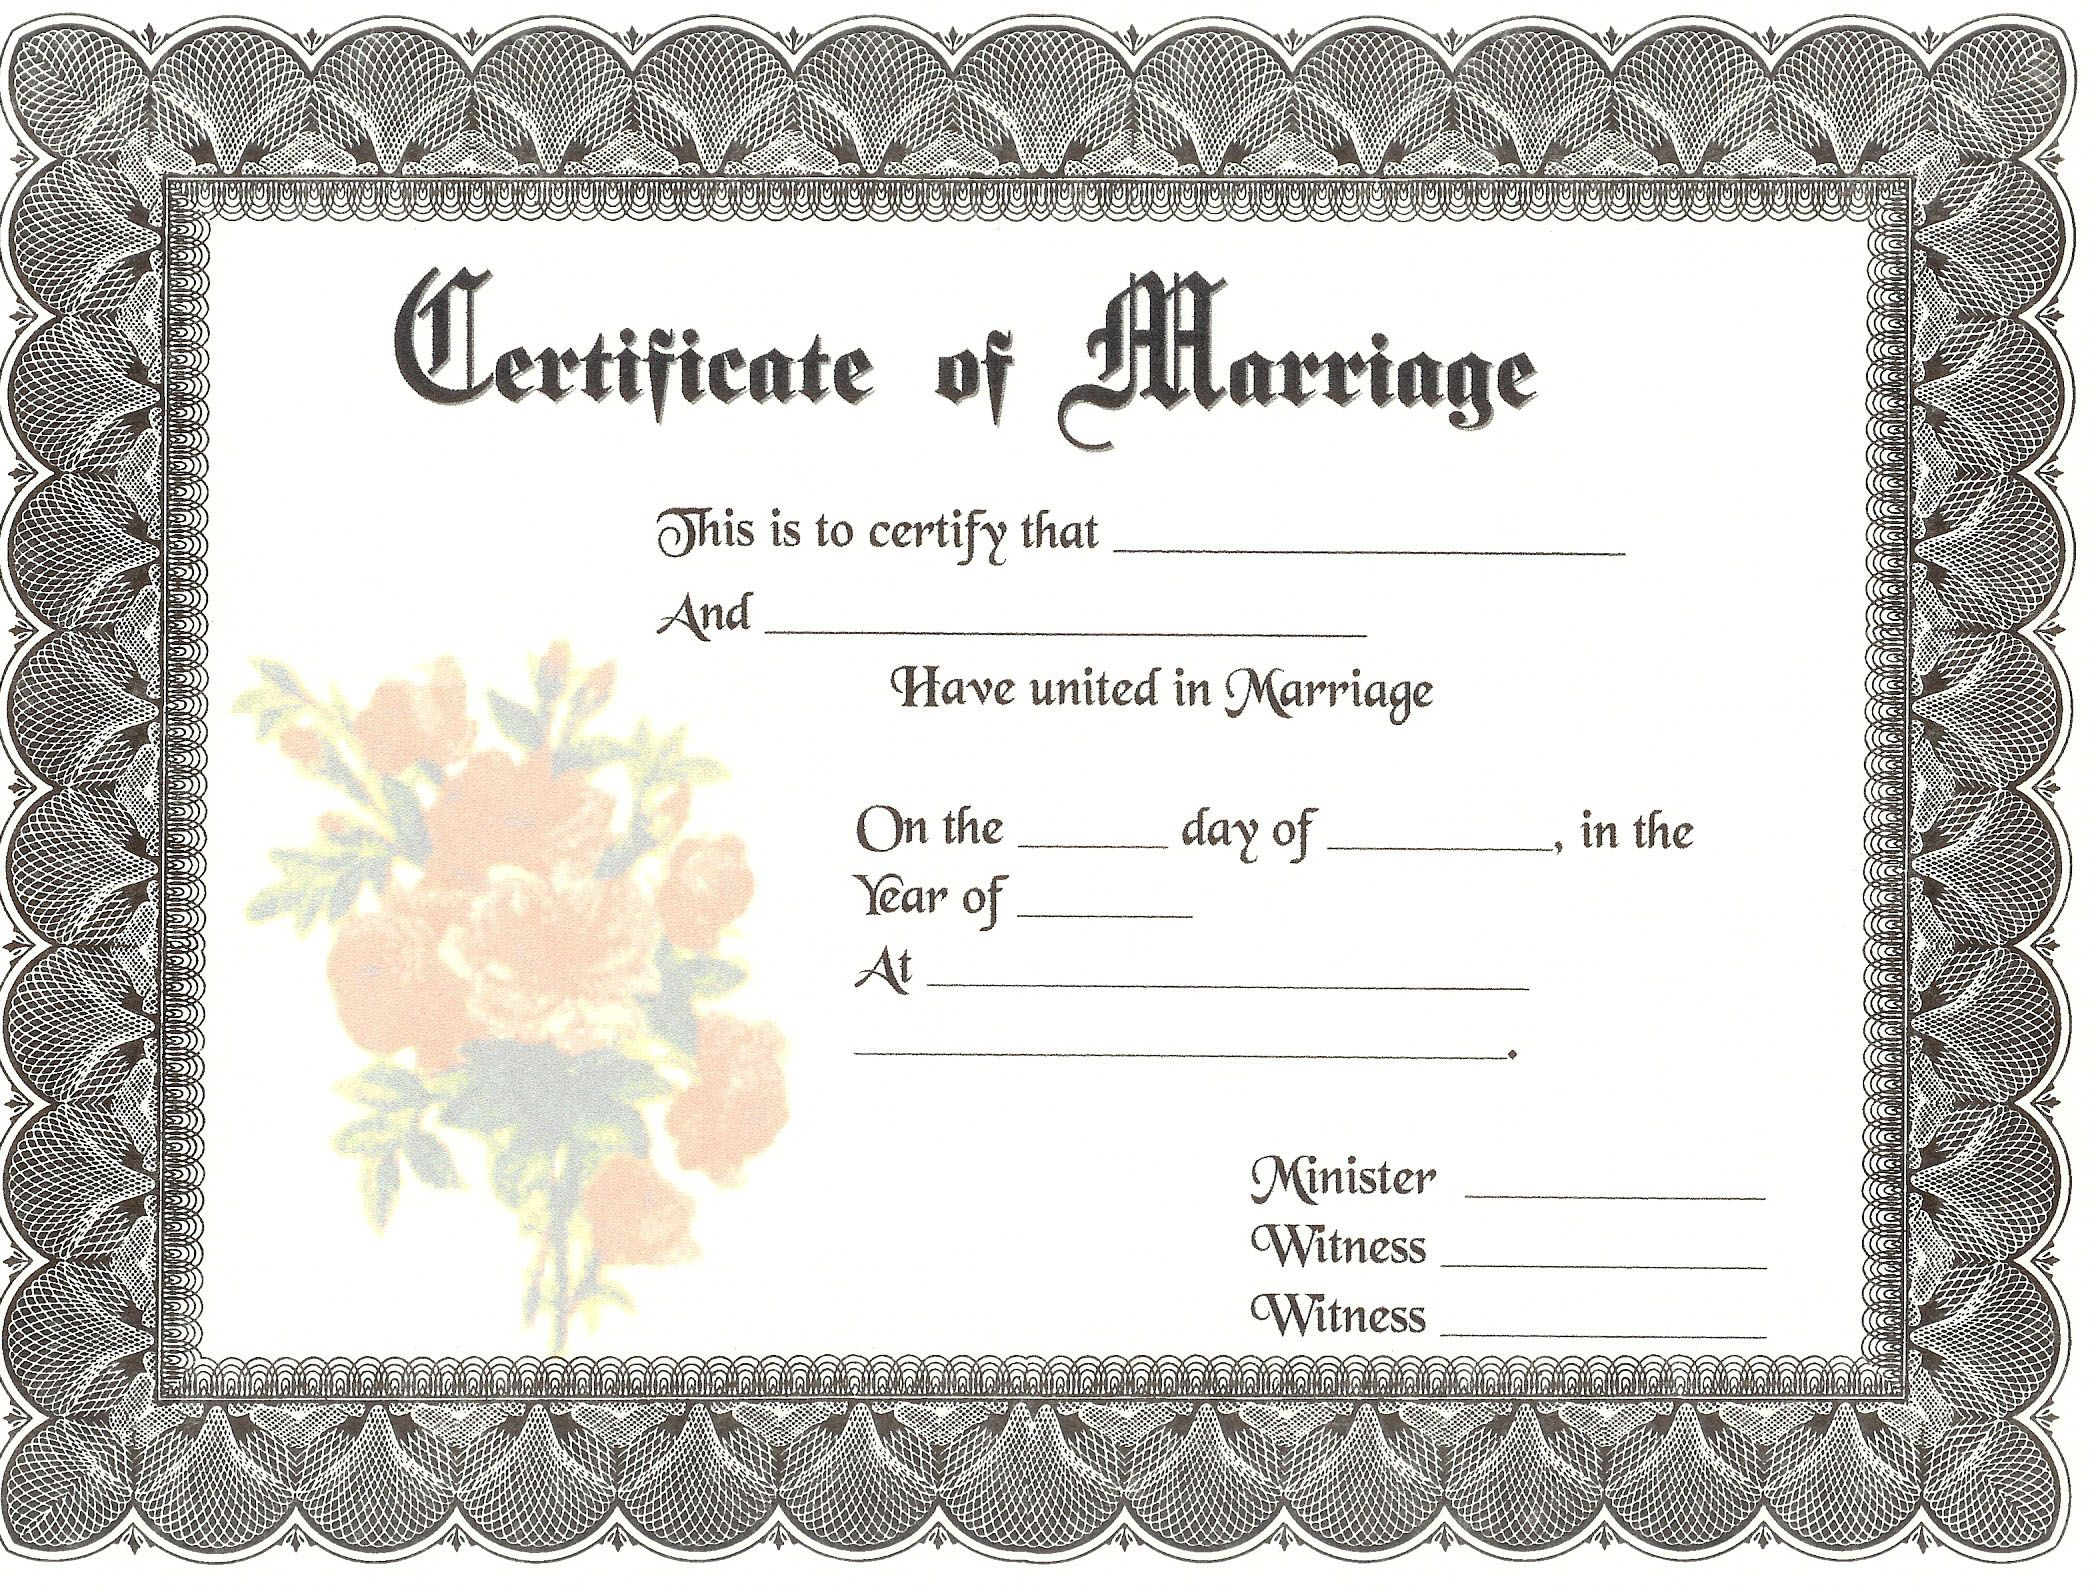 Blank Marriage Certificates | Download Blank Marriage With Blank Marriage Certificate Template